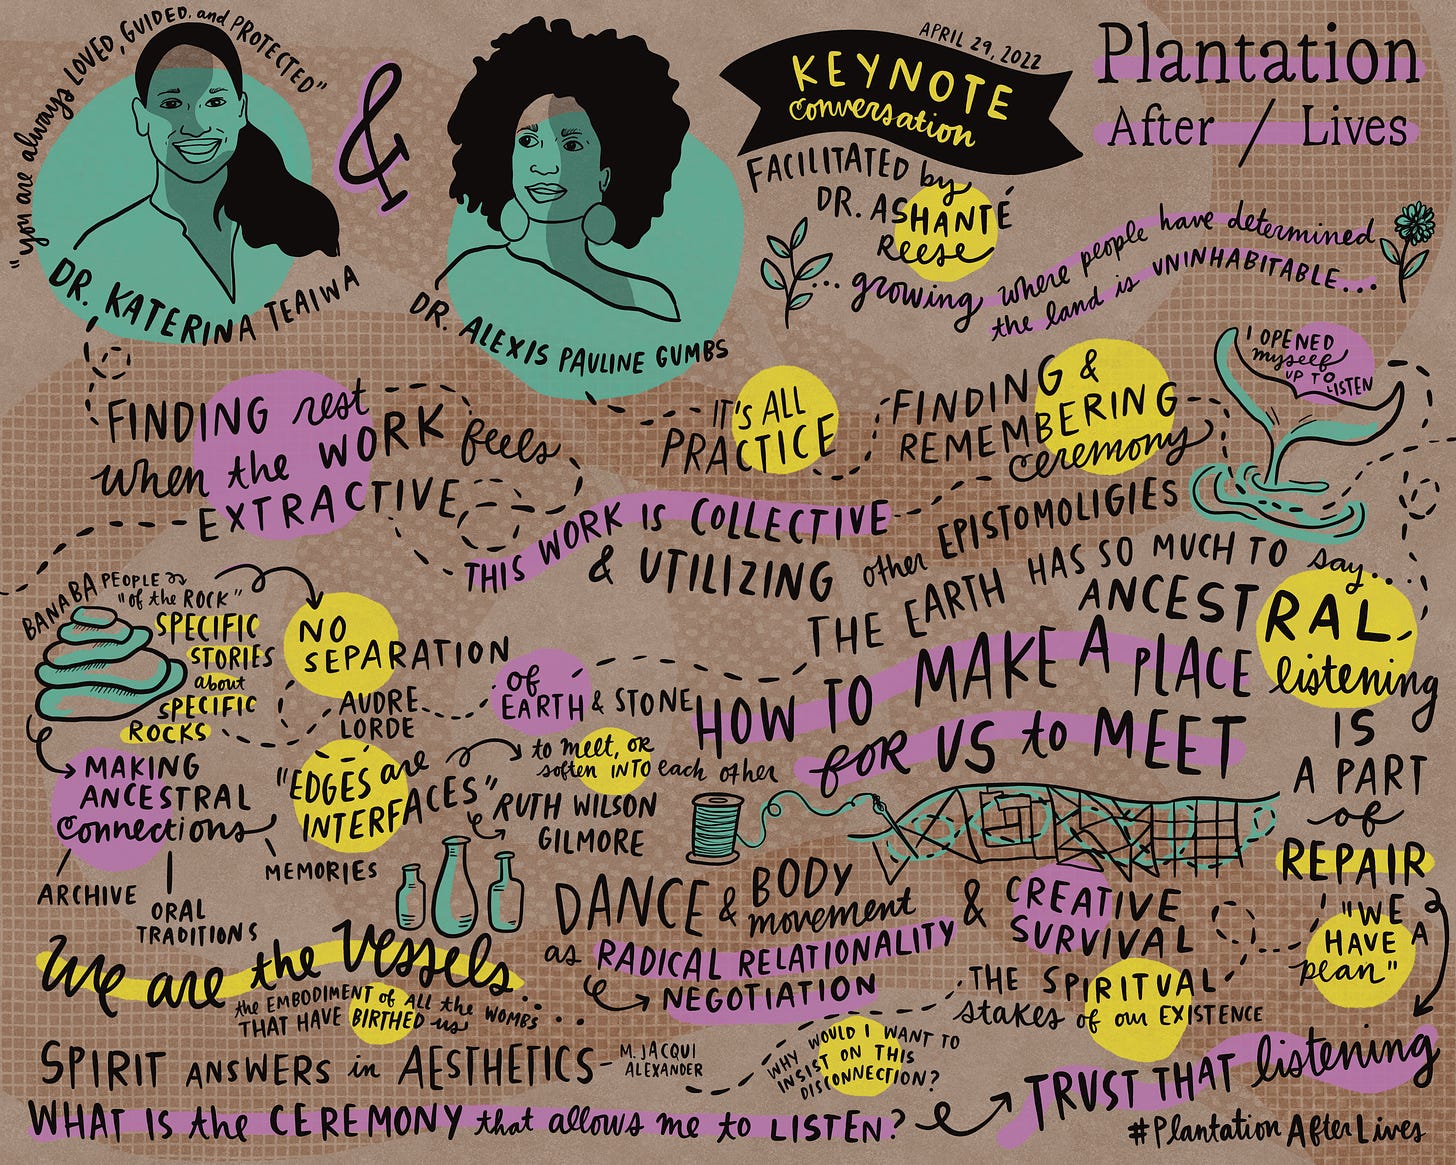 Graphic Recording for the Keynote conversation between Dr. Katerina Teaiwa and Dr. Alexis Pauline Gumbs for the Plantation After/Lives Symposium